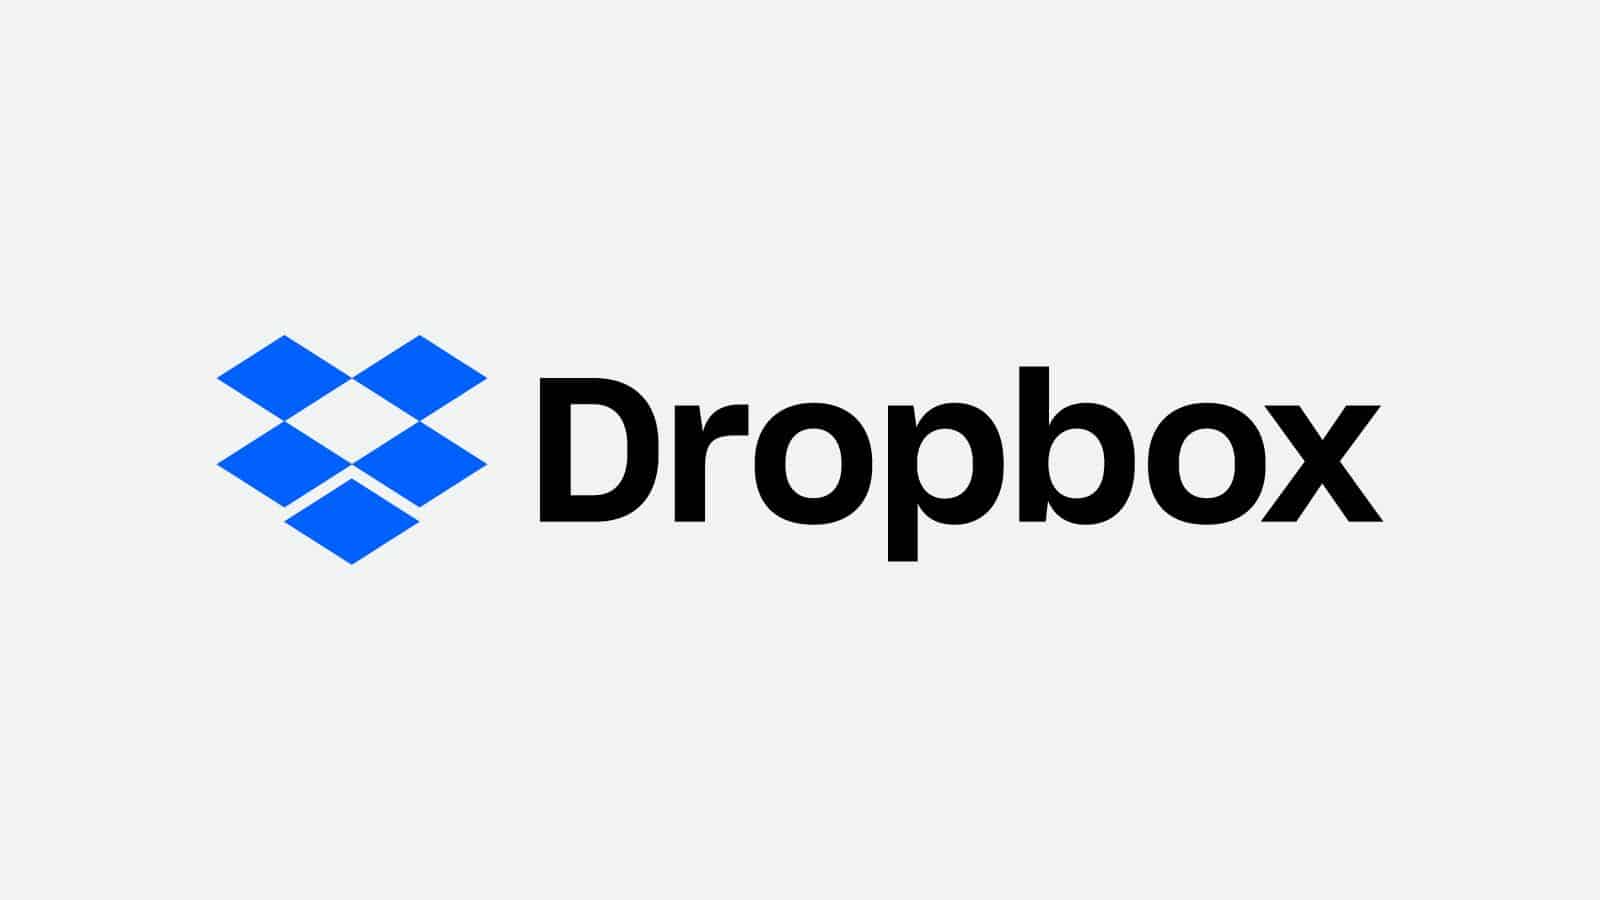 Dropbox launches new workspace to bring files, tools, and teams together